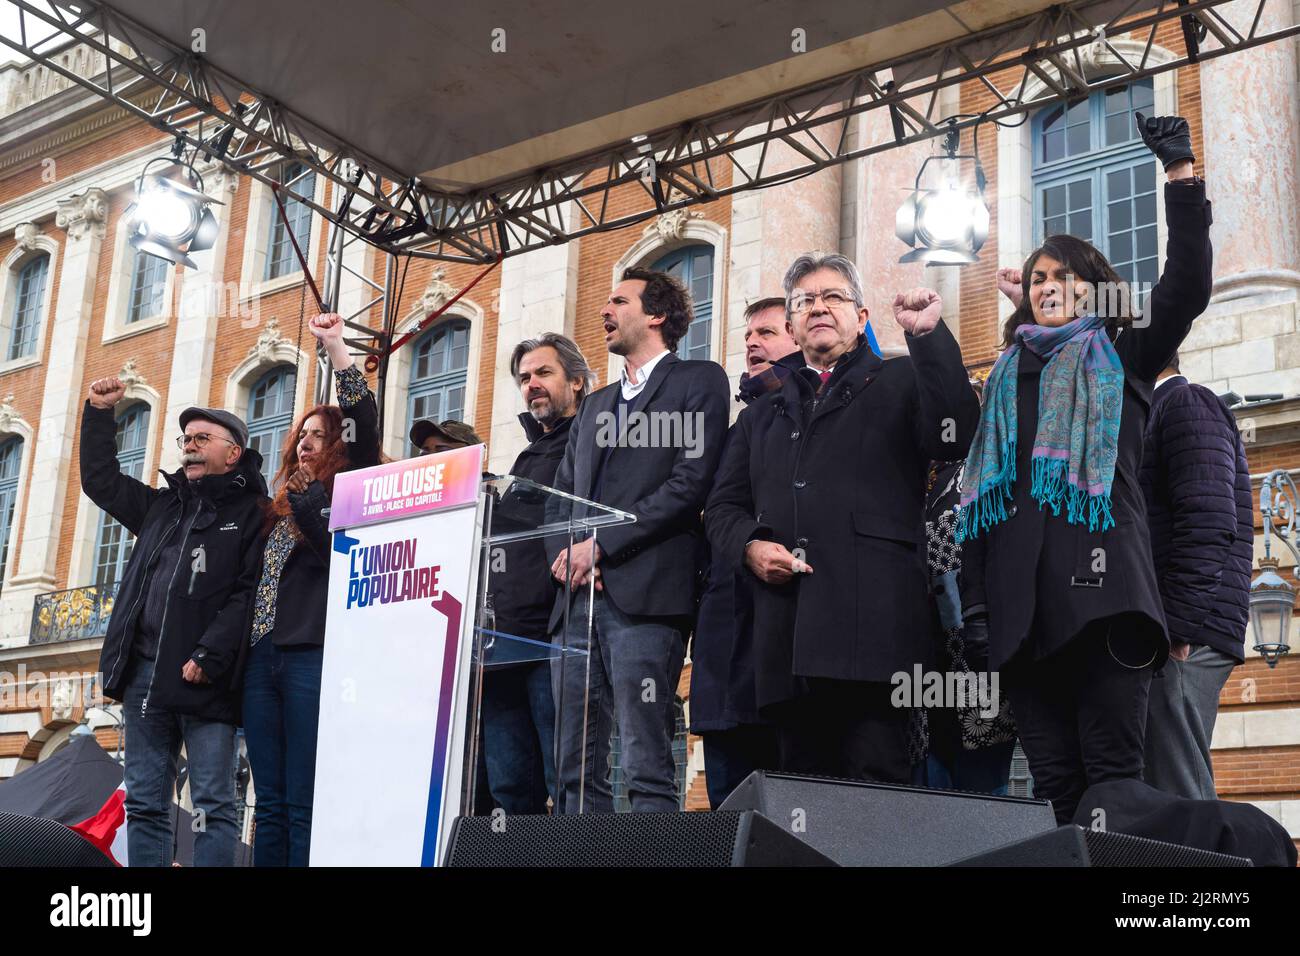 France, Toulouse, 2022-04-05. End of the Meeting, La marseillaise. The  candidate of the Popular Union, Jean-Luc Melenchon for his Meeting of the  presidential election 2022 in Toulouse, place du Capitole. Another world